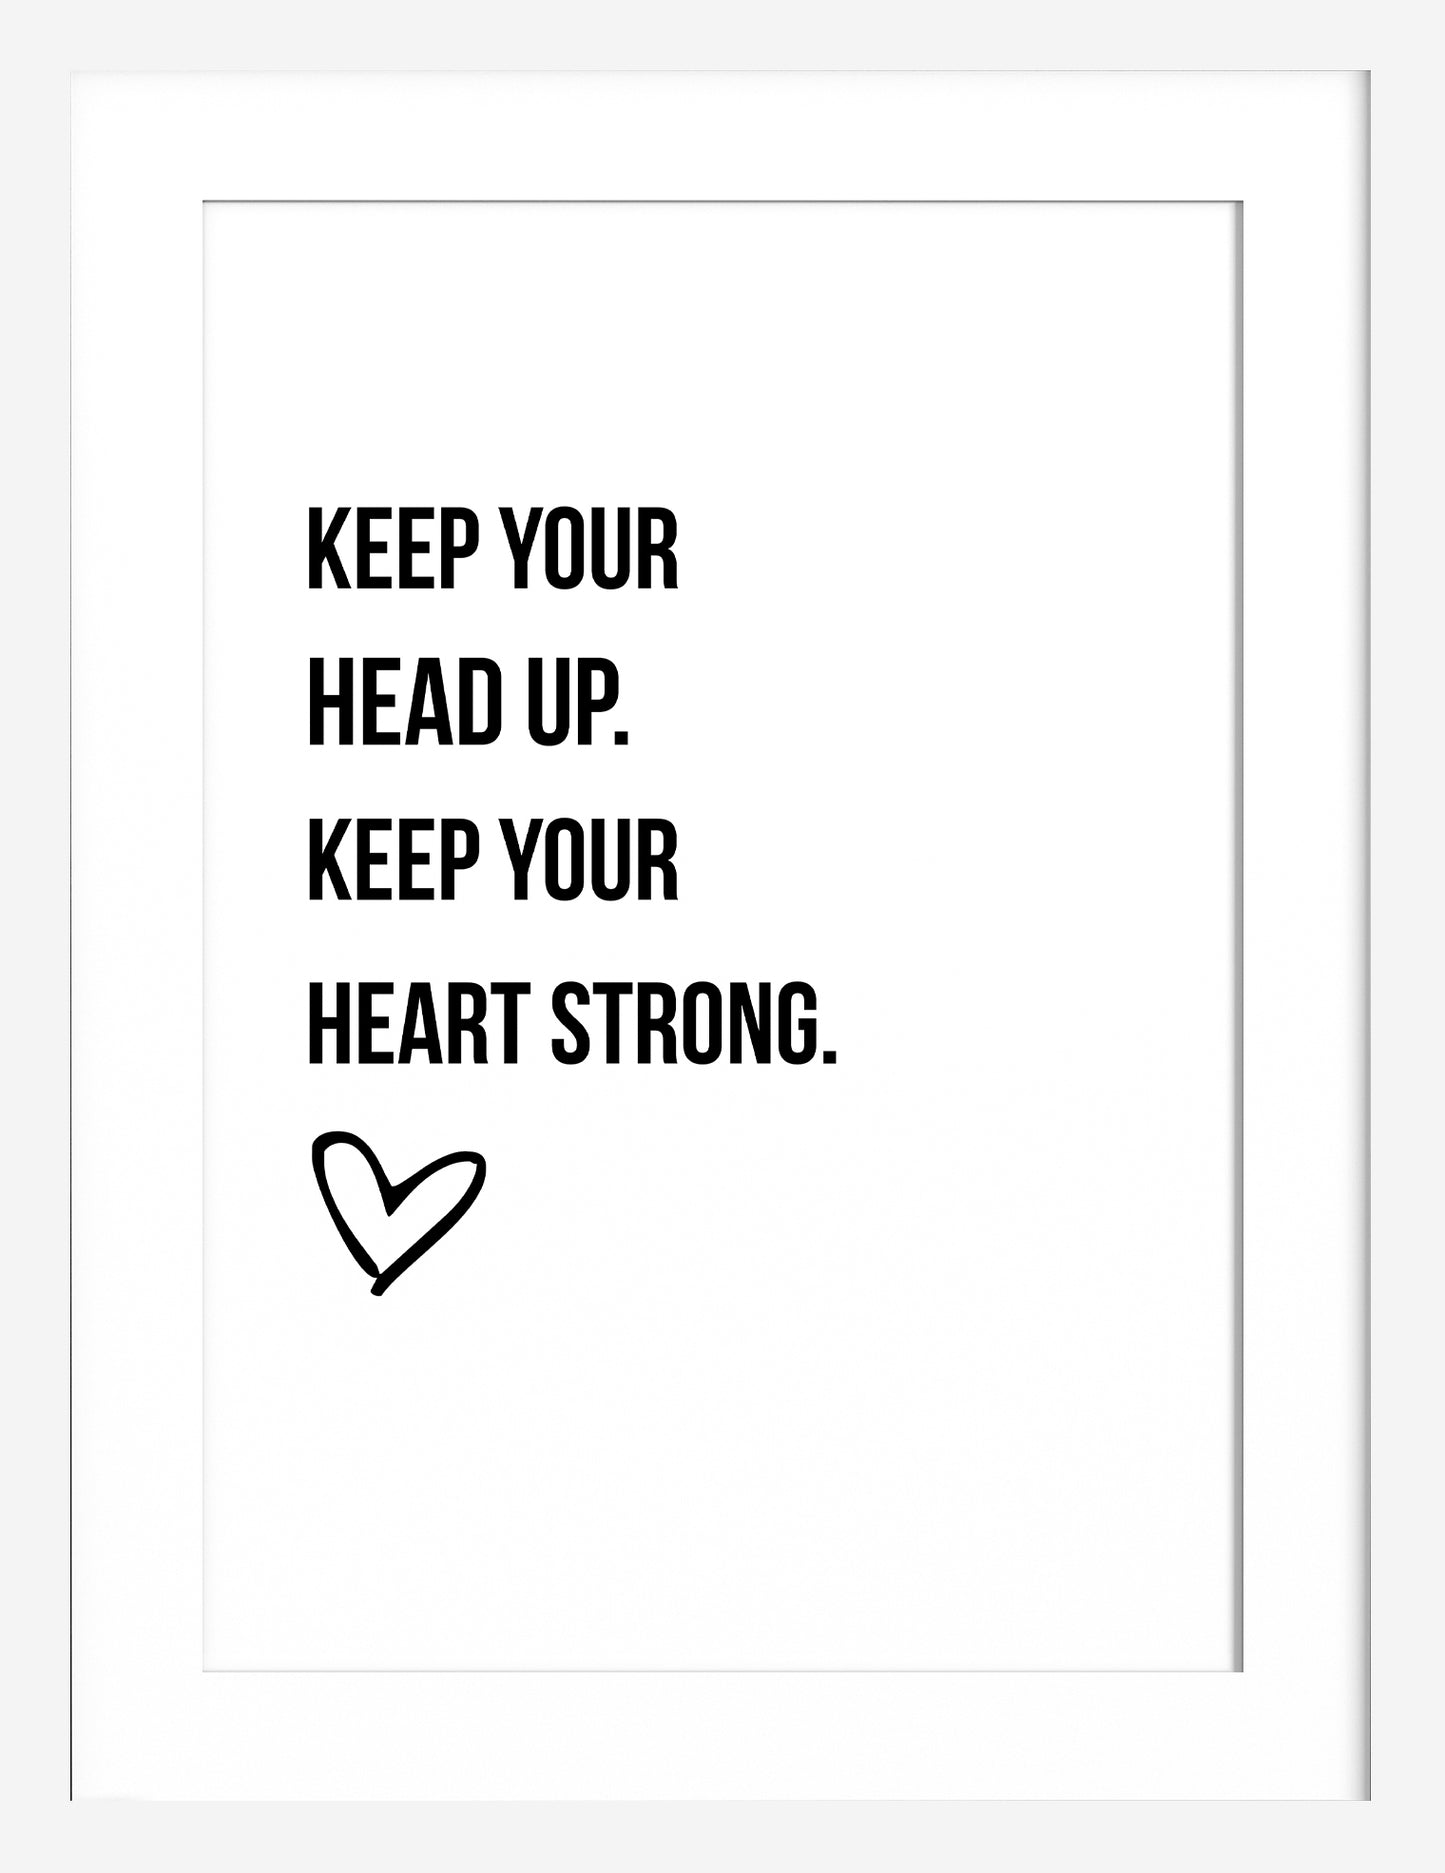 Keep Your Head Up. Keep Your Heart Strong.